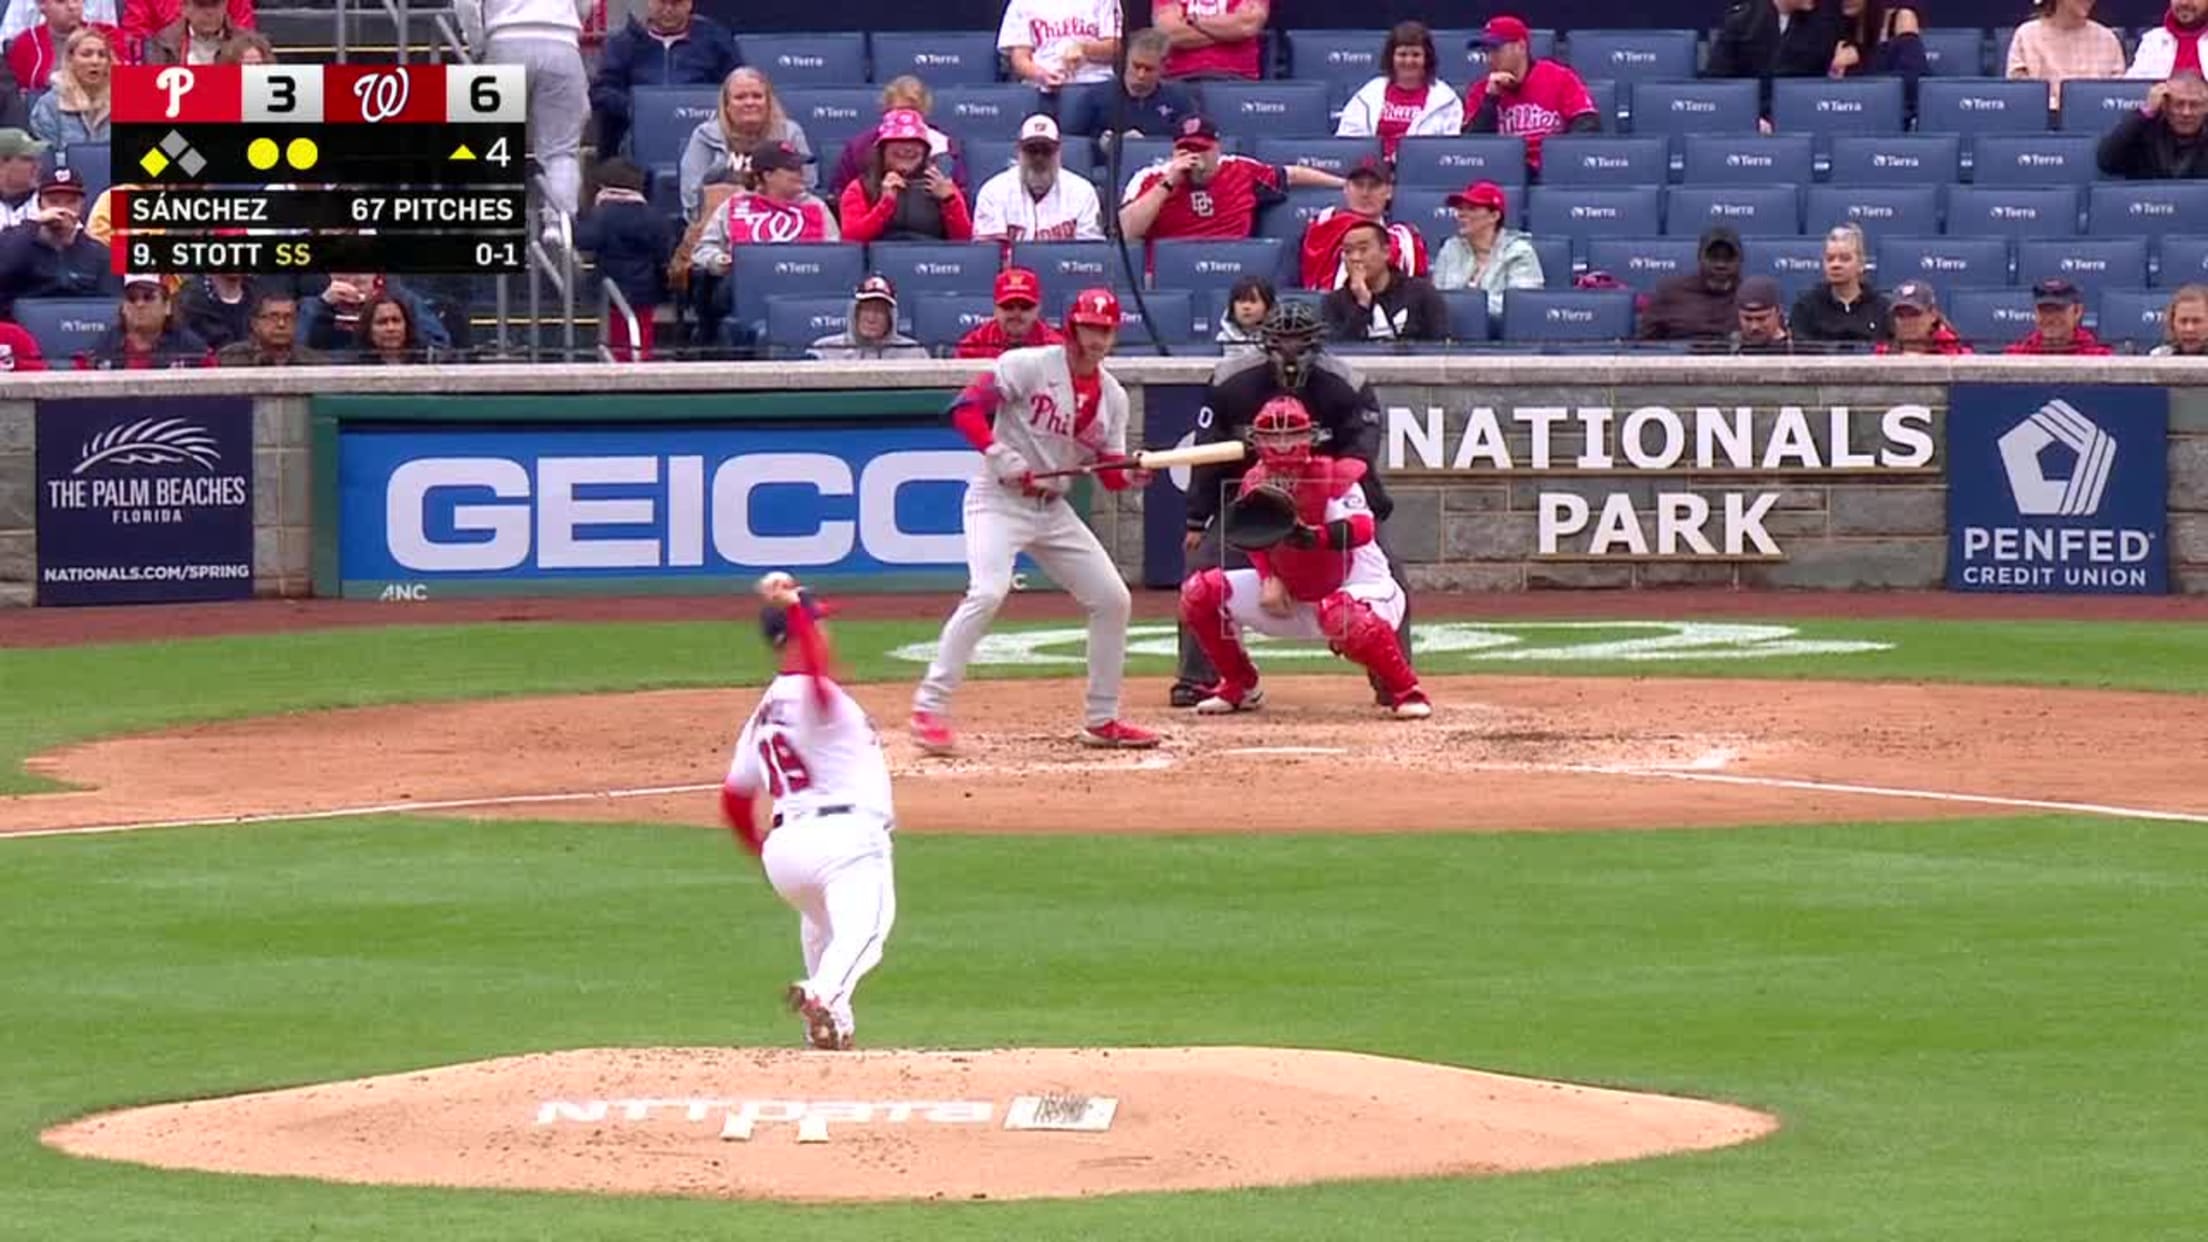 Opening Day 2022: '5ever,' Phillies rookie Bryson Stott honoring